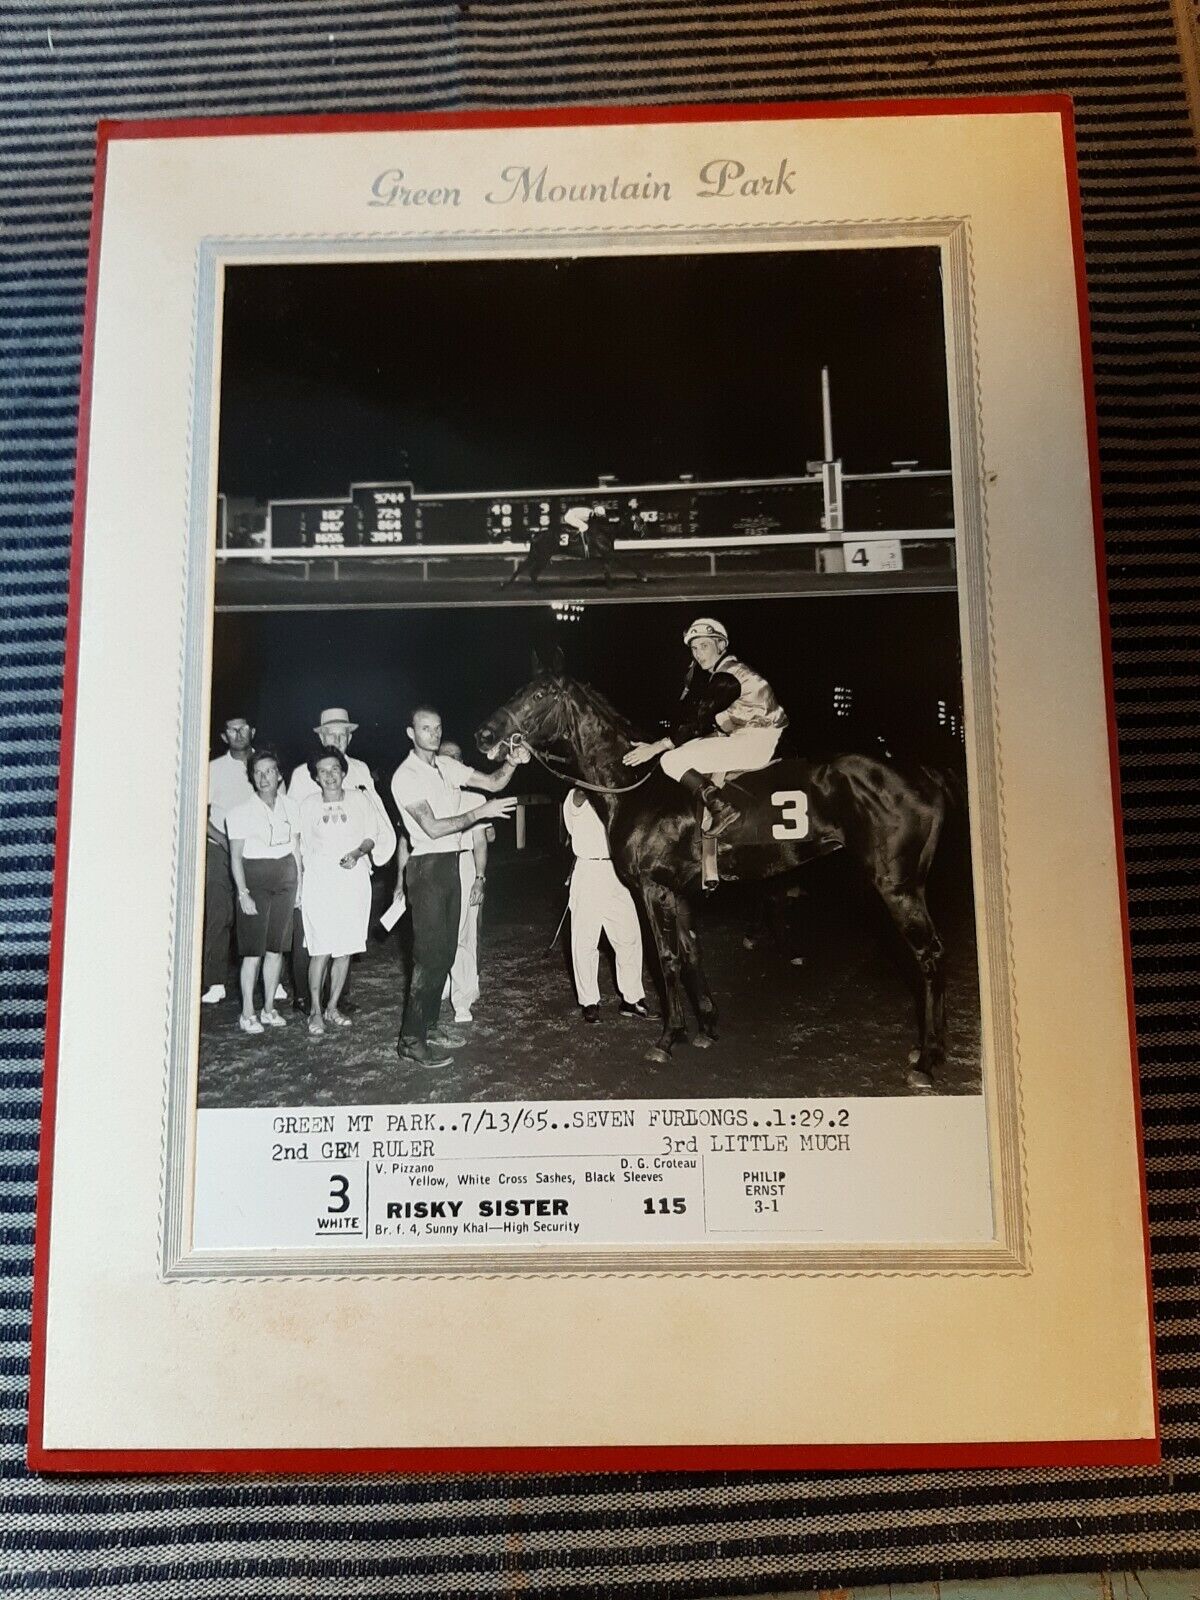 VINTAGE 1965 GREEN MOUNTAIN PARK RACE TRACK VT WIN PHOTO HORSE RACING B&W Matted